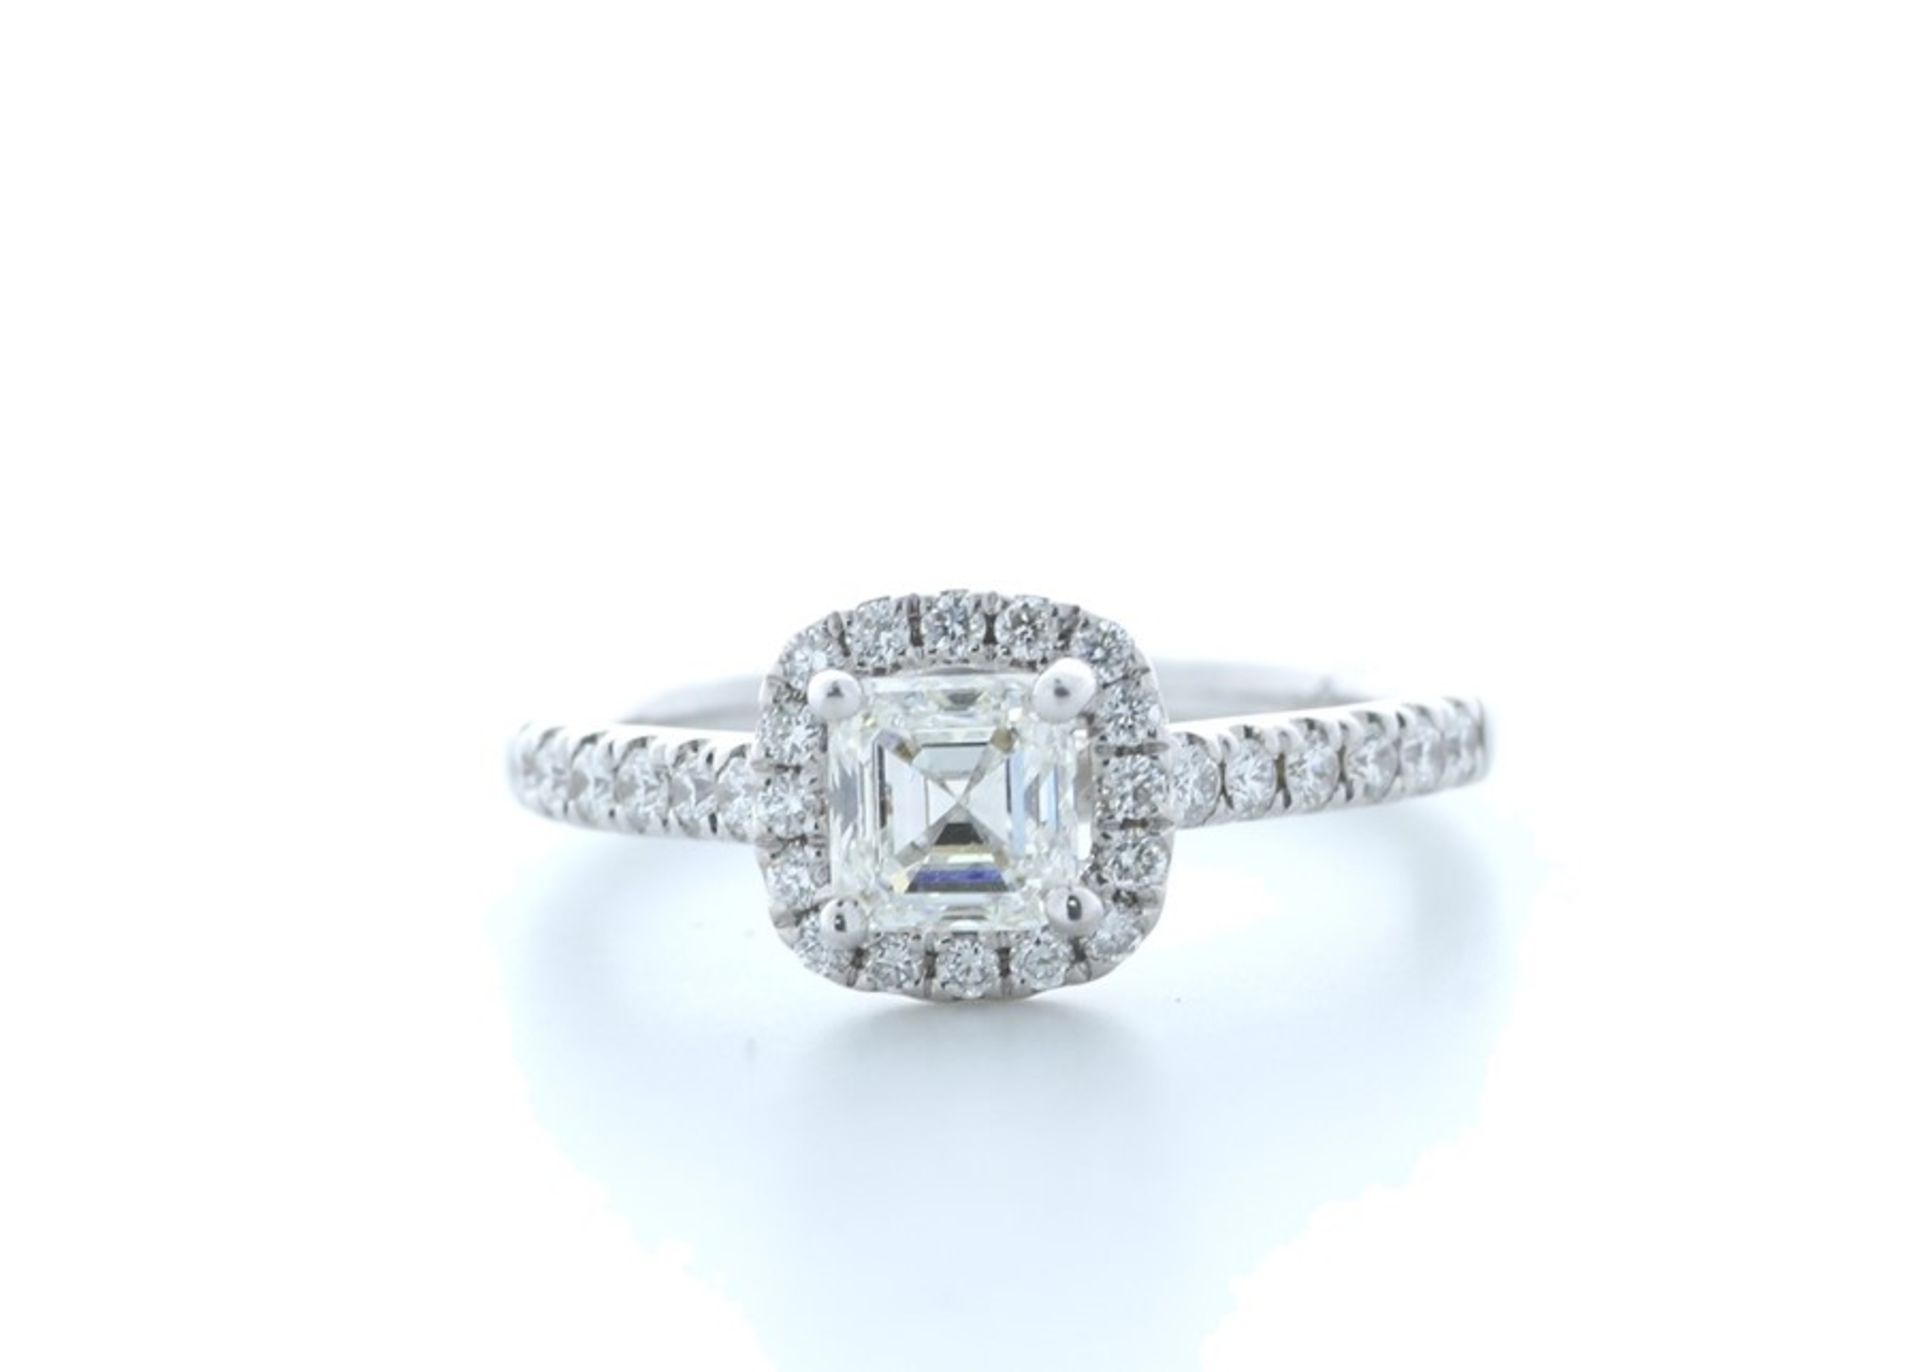 18ct White Gold Flawless Asscher Cut Diamond Ring Valued by IDI £18,000.00